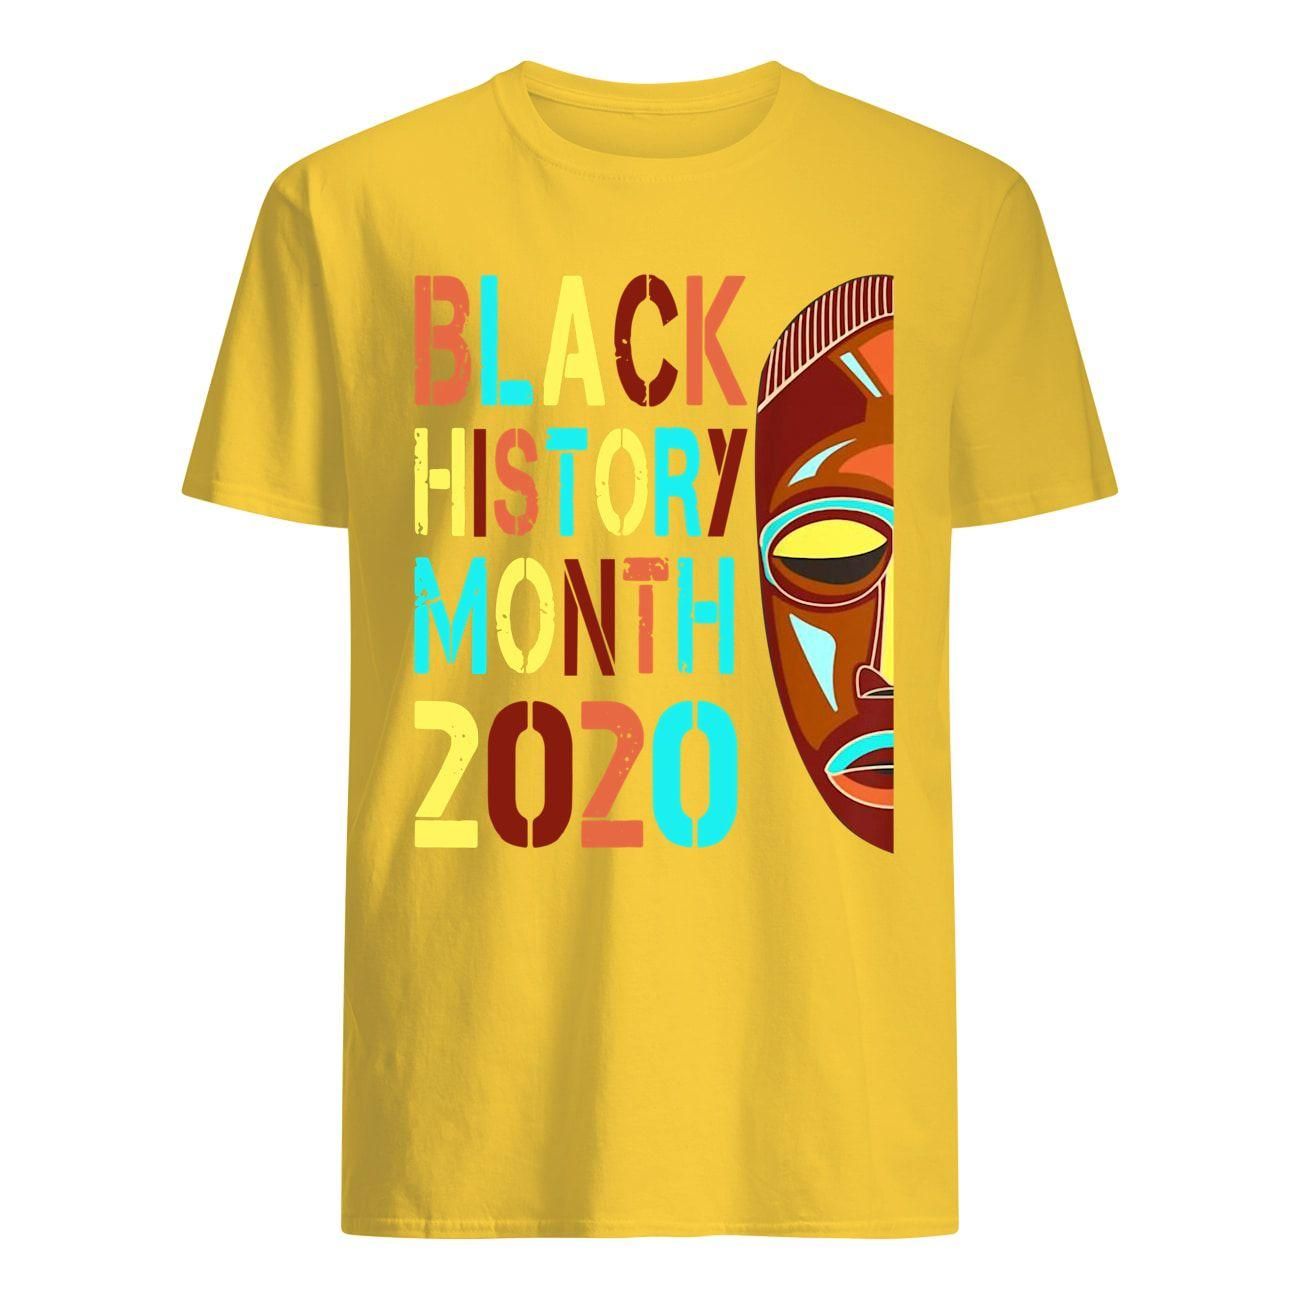 Black History Month African American Woman Afro Pride Shirt Classic Men's T-Shirt